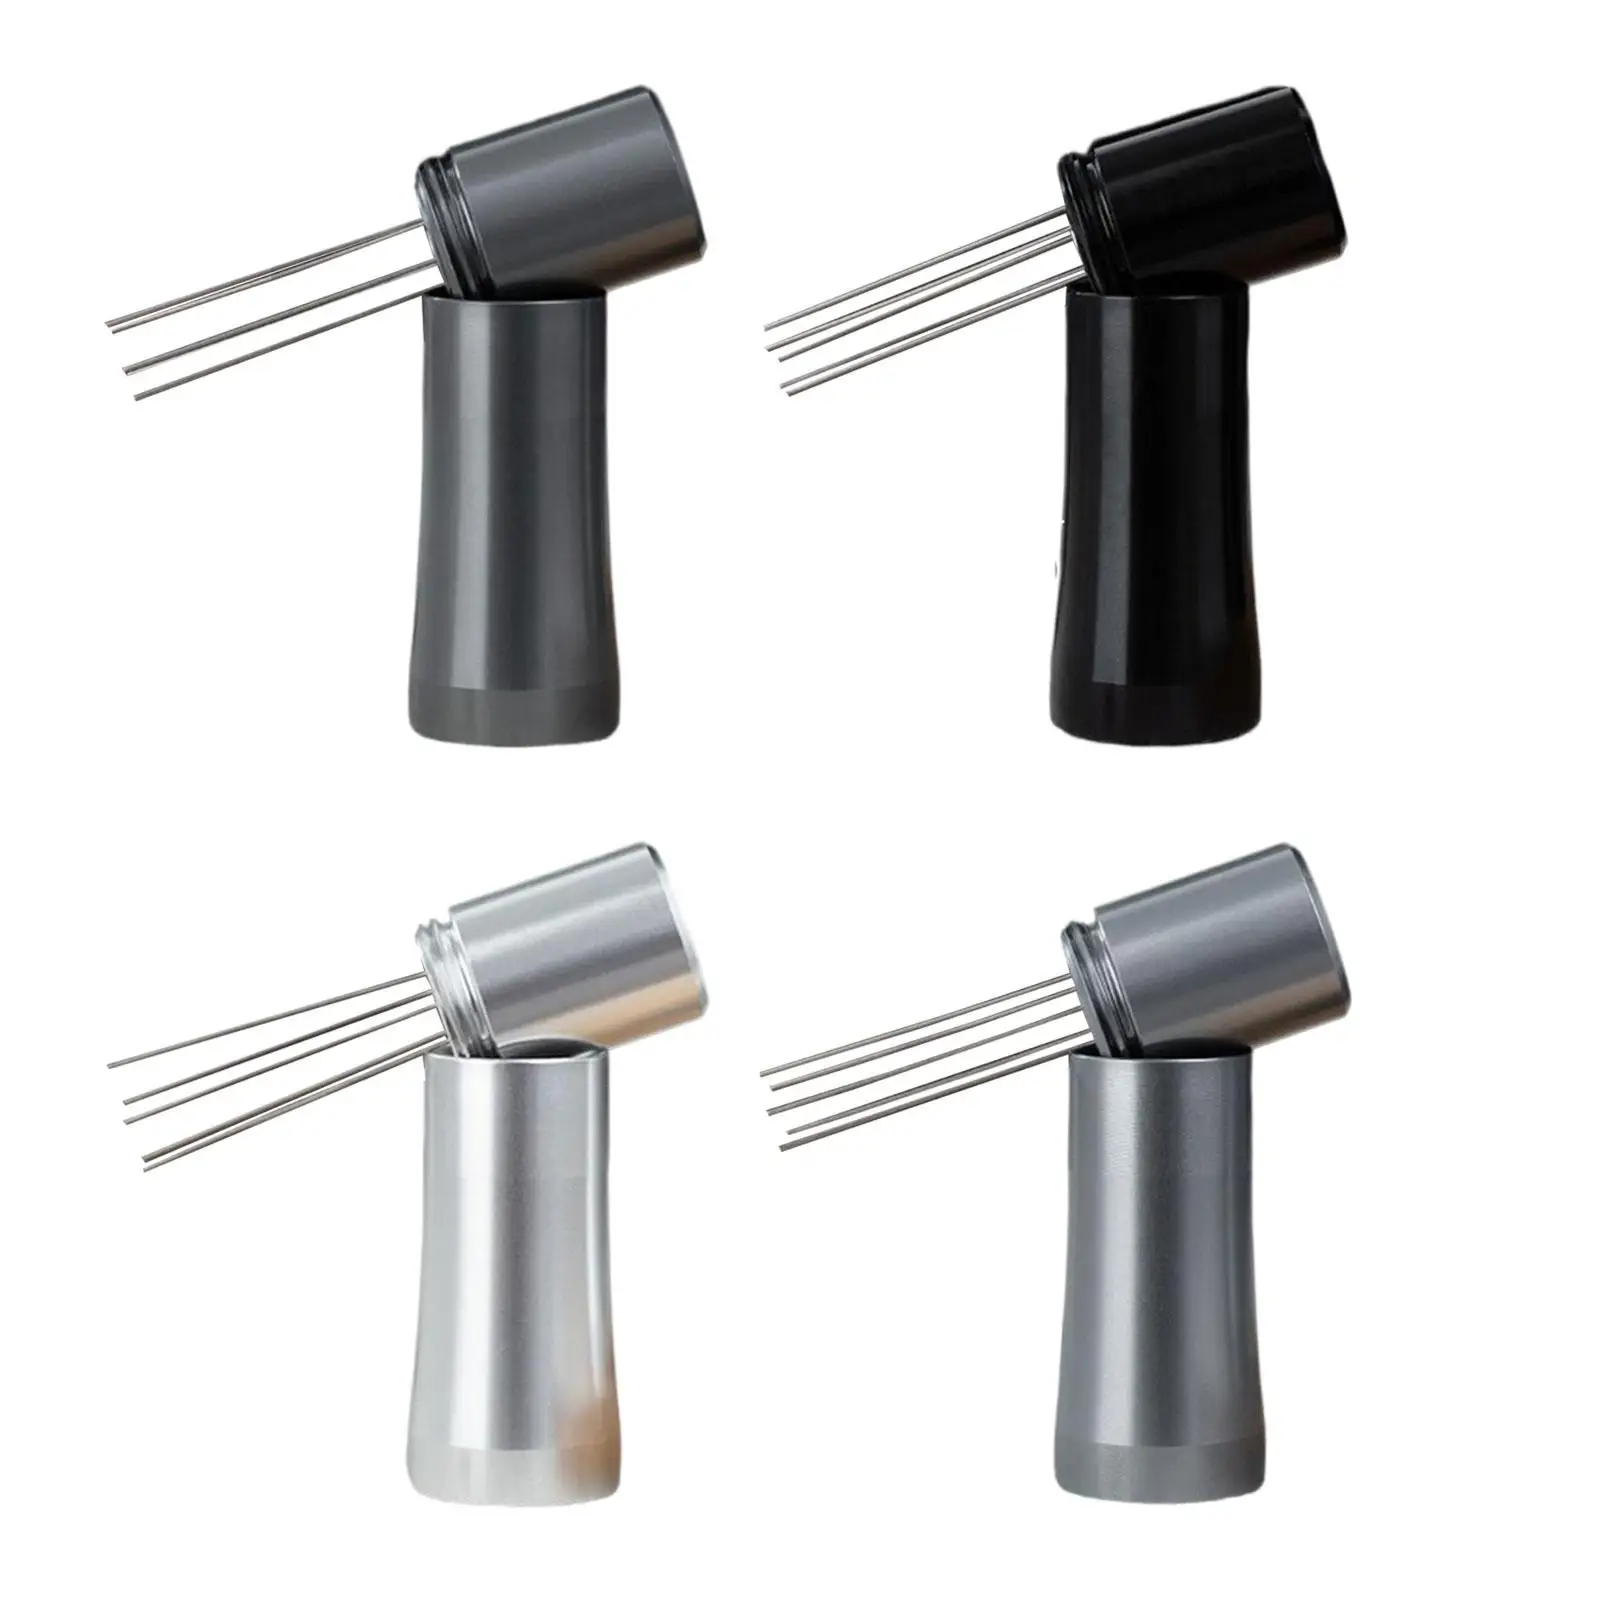 Stainless steel Tamper Coffee Distribution Tool for Cold Drink Shop Kitchen